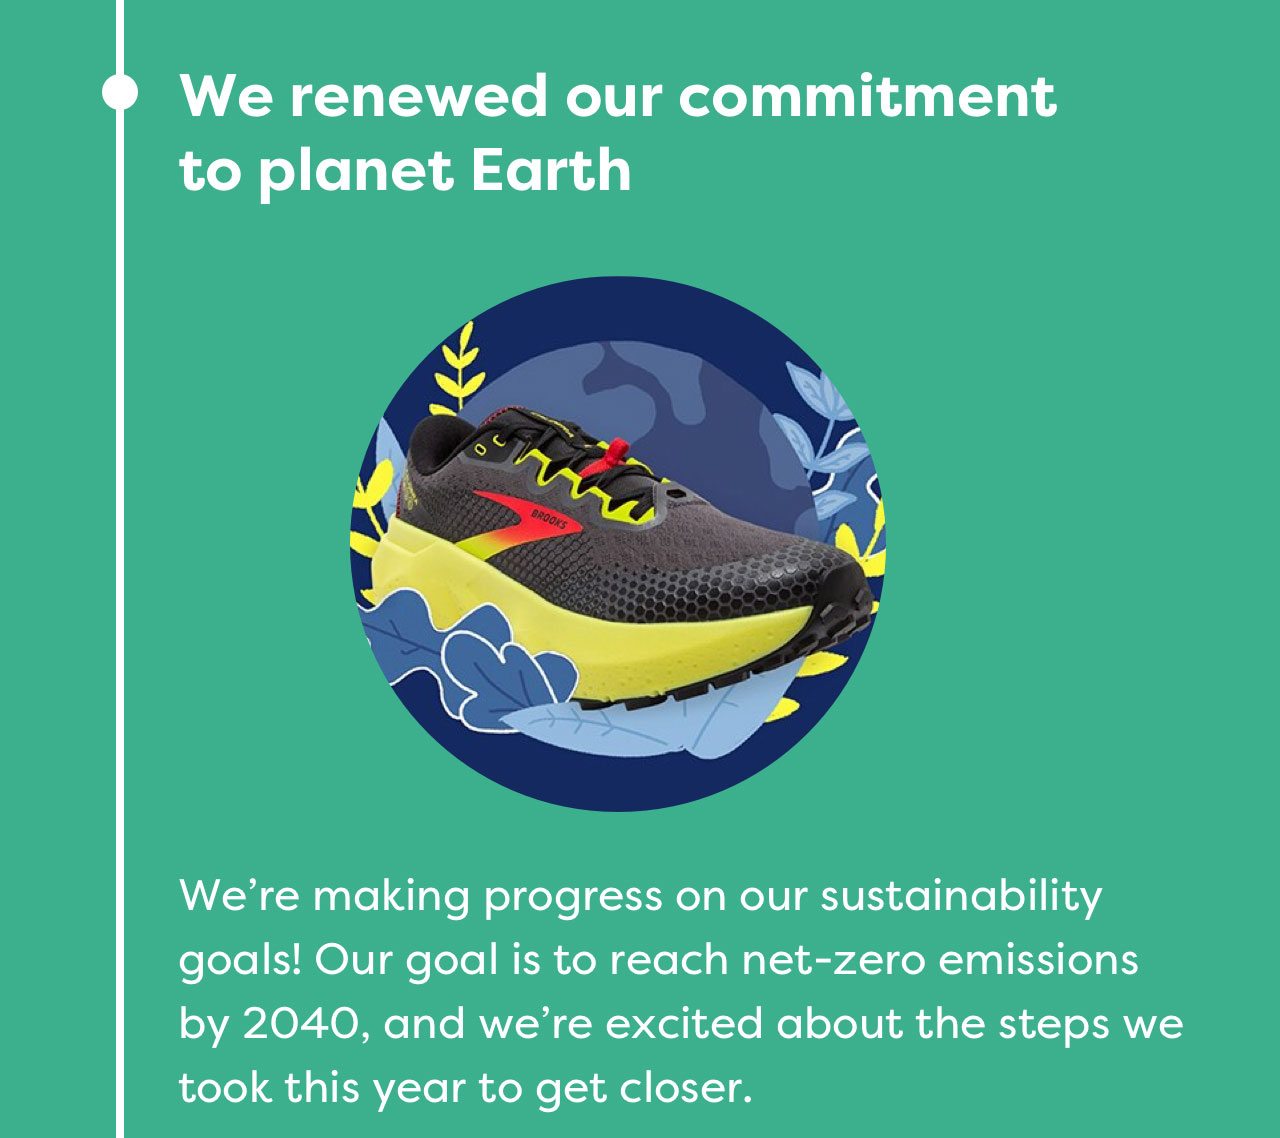 We renewed our commitment to planet Earth